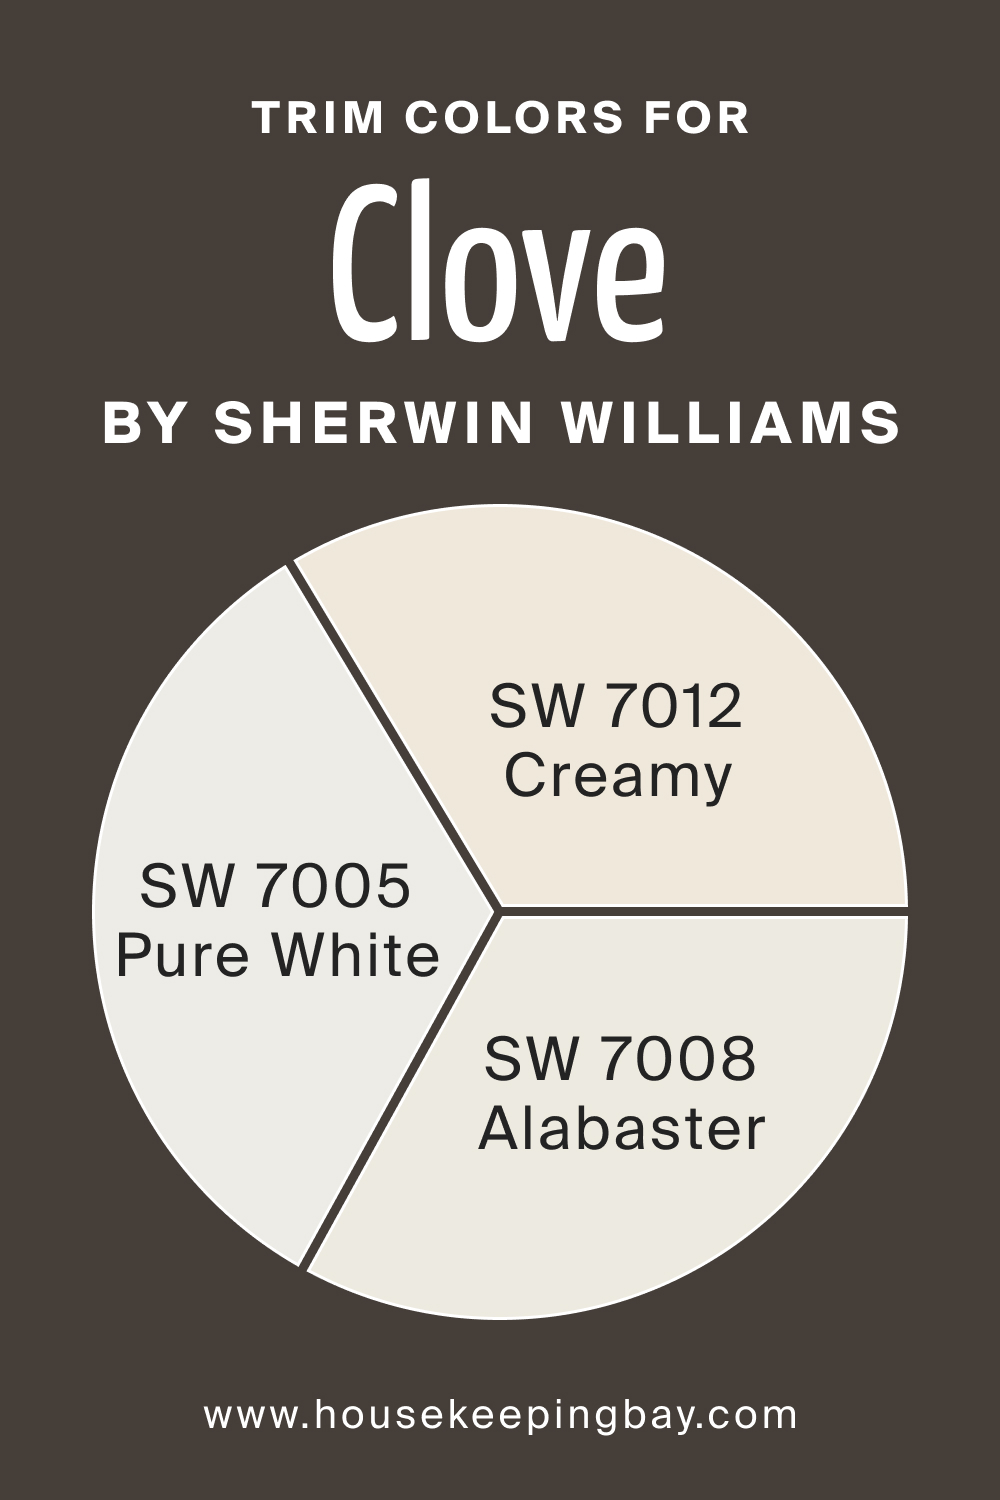 Trim Colors of SW 9605 Clove by Sherwin Williams